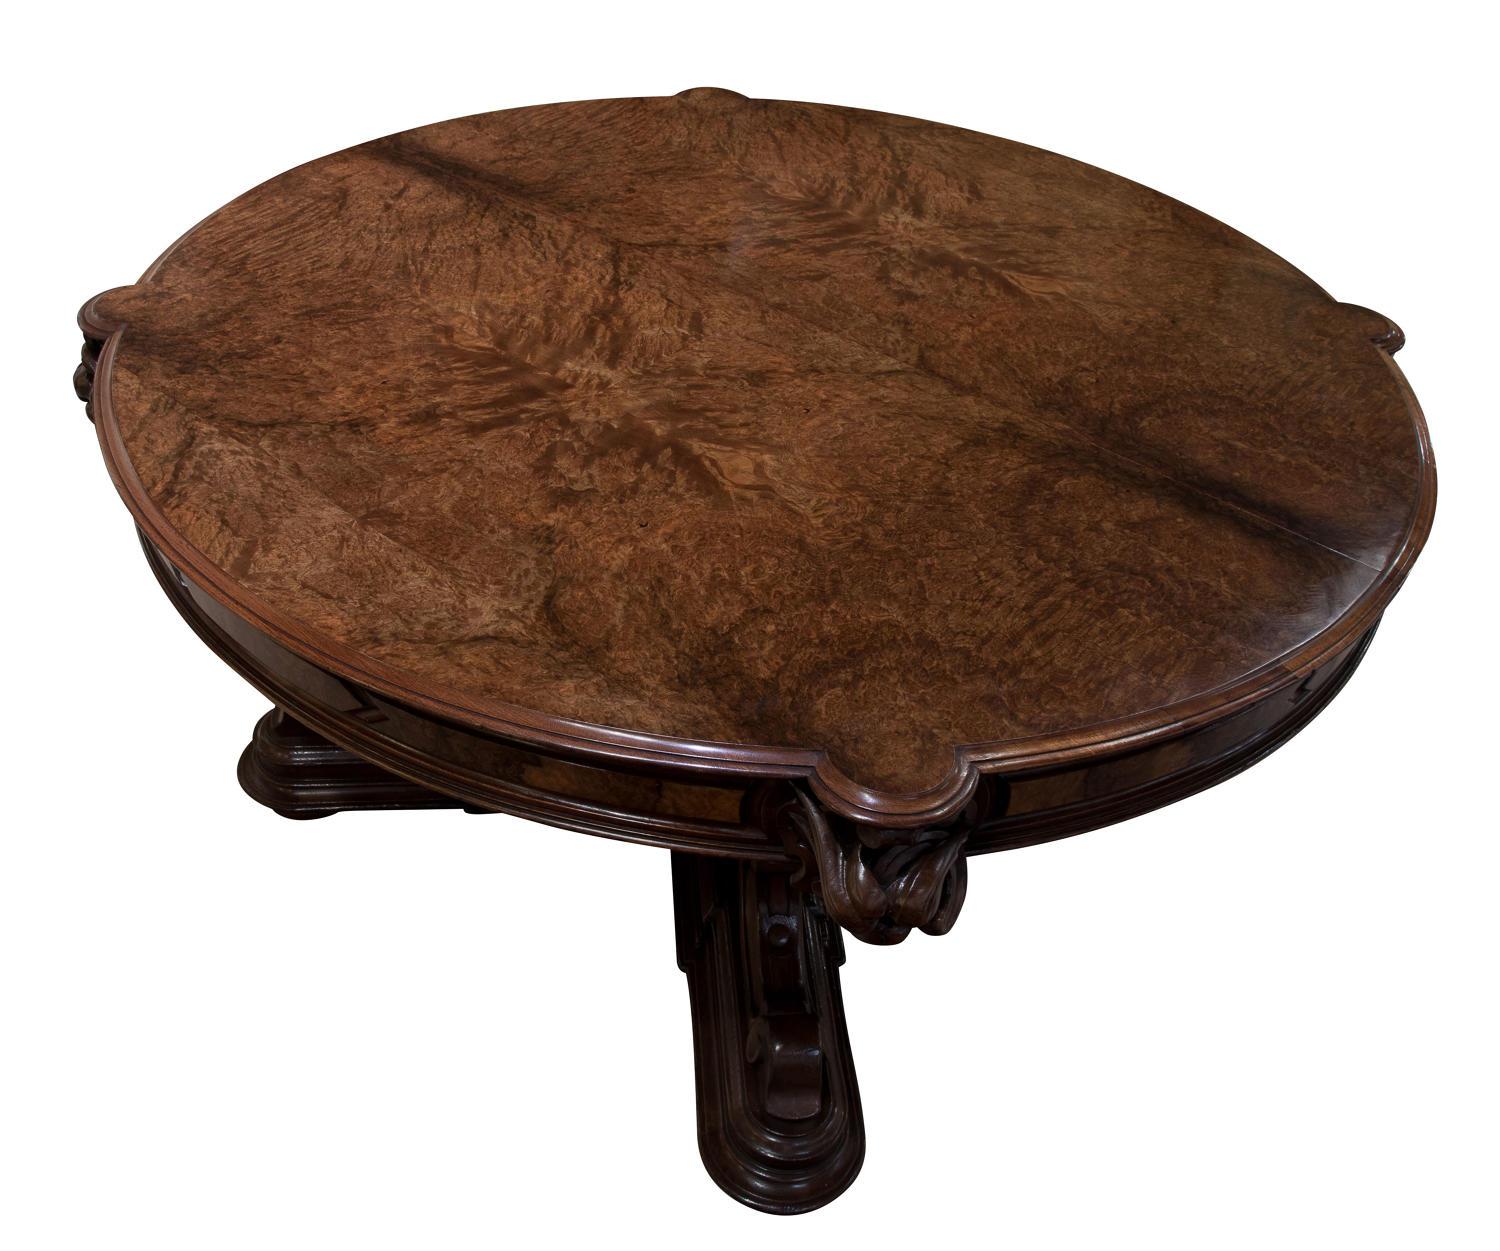 Baroque Large Burr Walnut Extending Dining Table or Boardroom Table, circa 1851